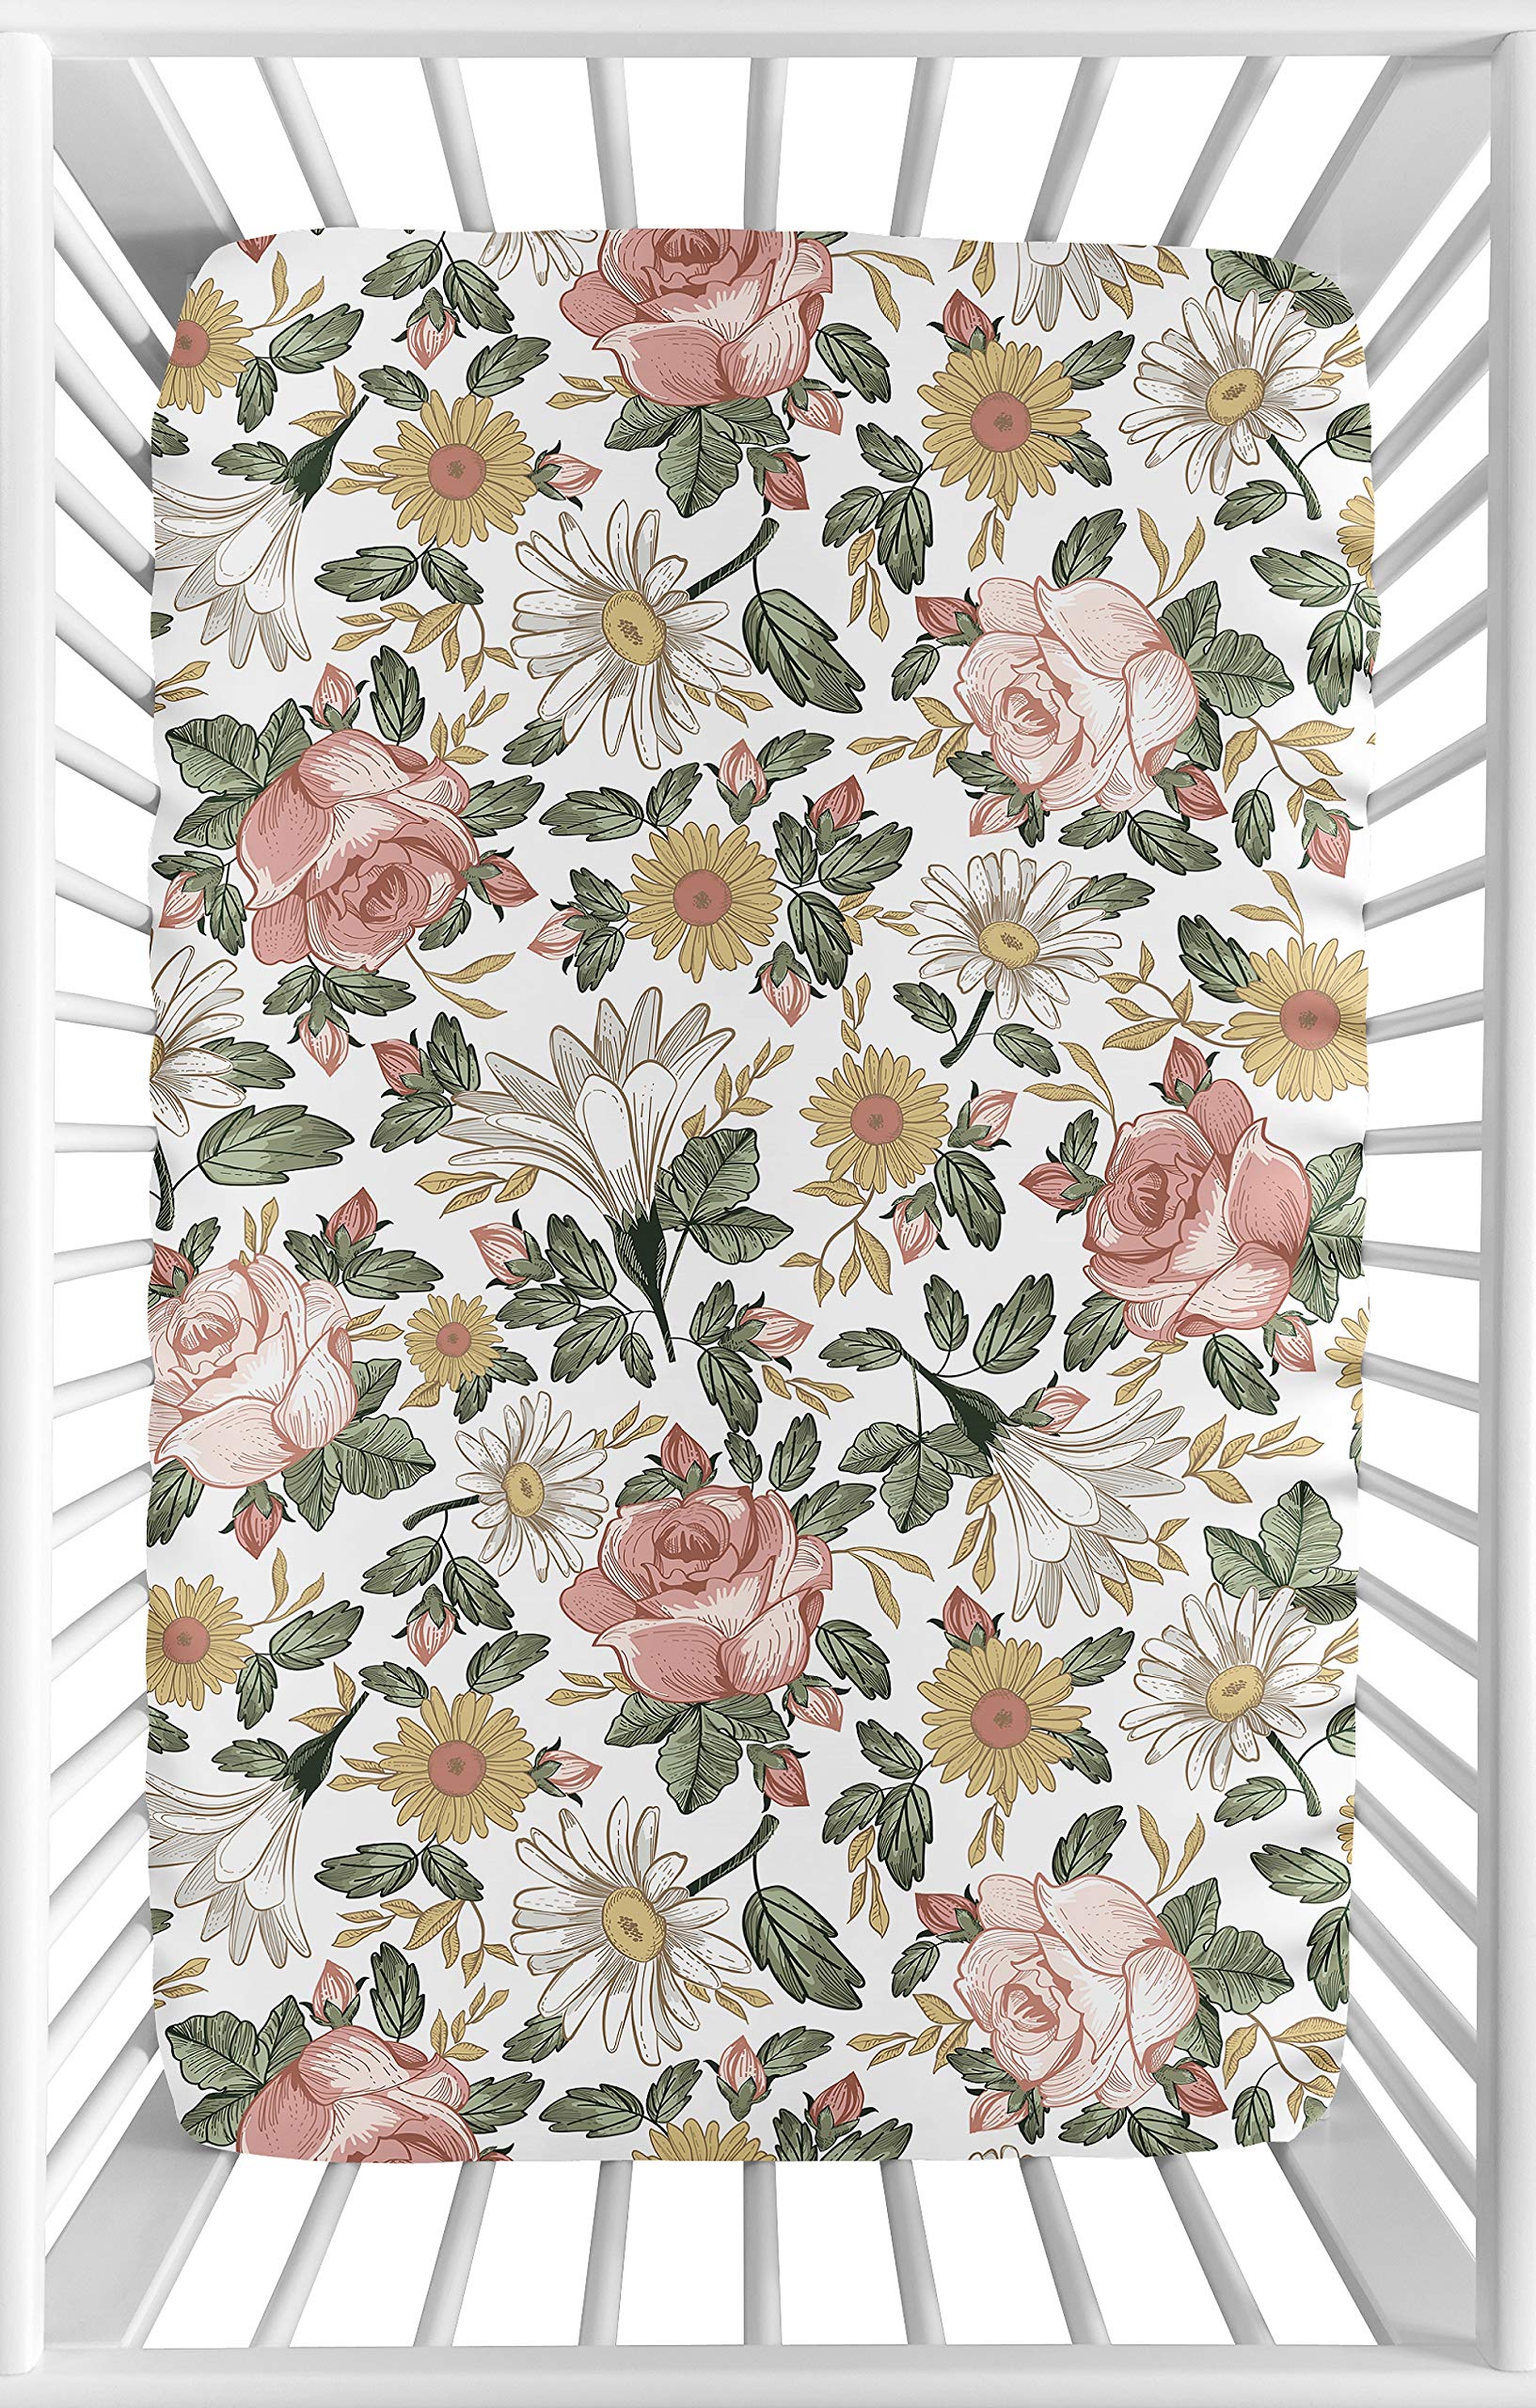 Sweet Jojo Designs Vintage Floral Boho Girl Fitted Mini Crib Sheet Baby Nursery for Portable Crib or Pack and Play - Blush Pink, Yellow, Green and White Shabby Chic Rose Flower Farmhouse